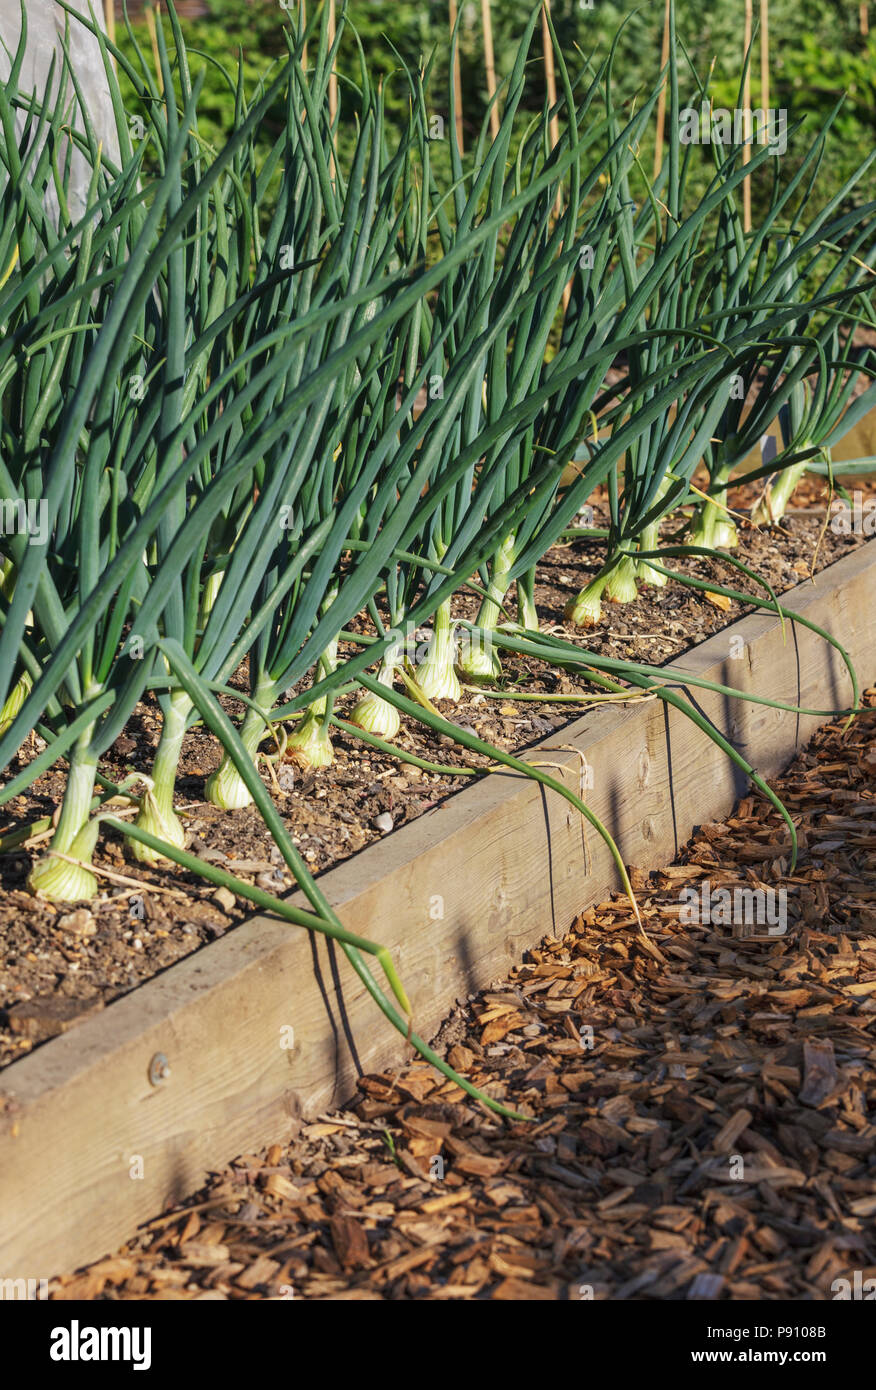 Onions in a raised garden bed Stock Photo